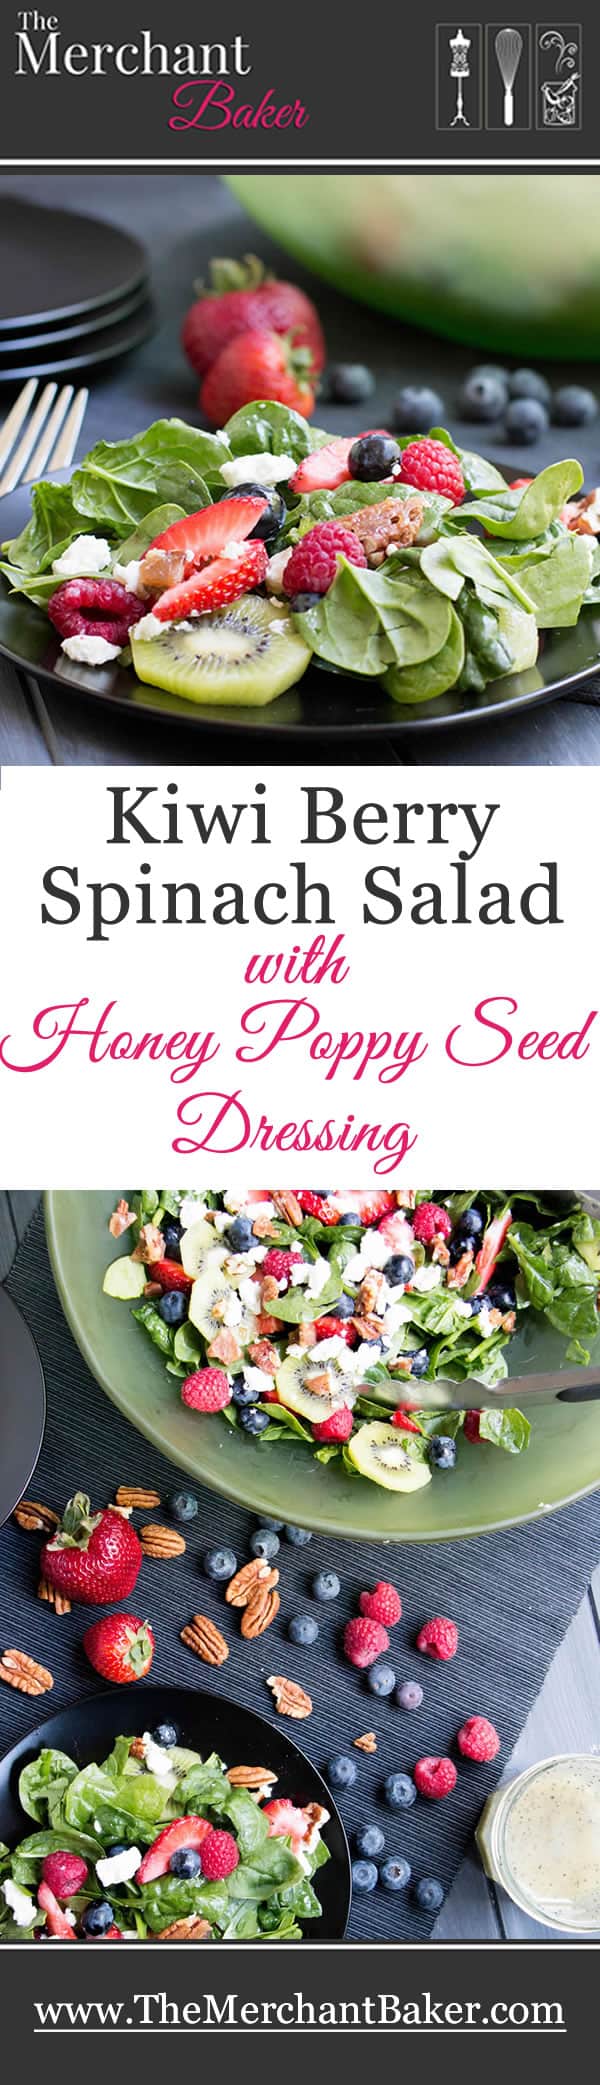 Kiwi Berry Spinach Salad with Honey Poppyseed Dressing pin